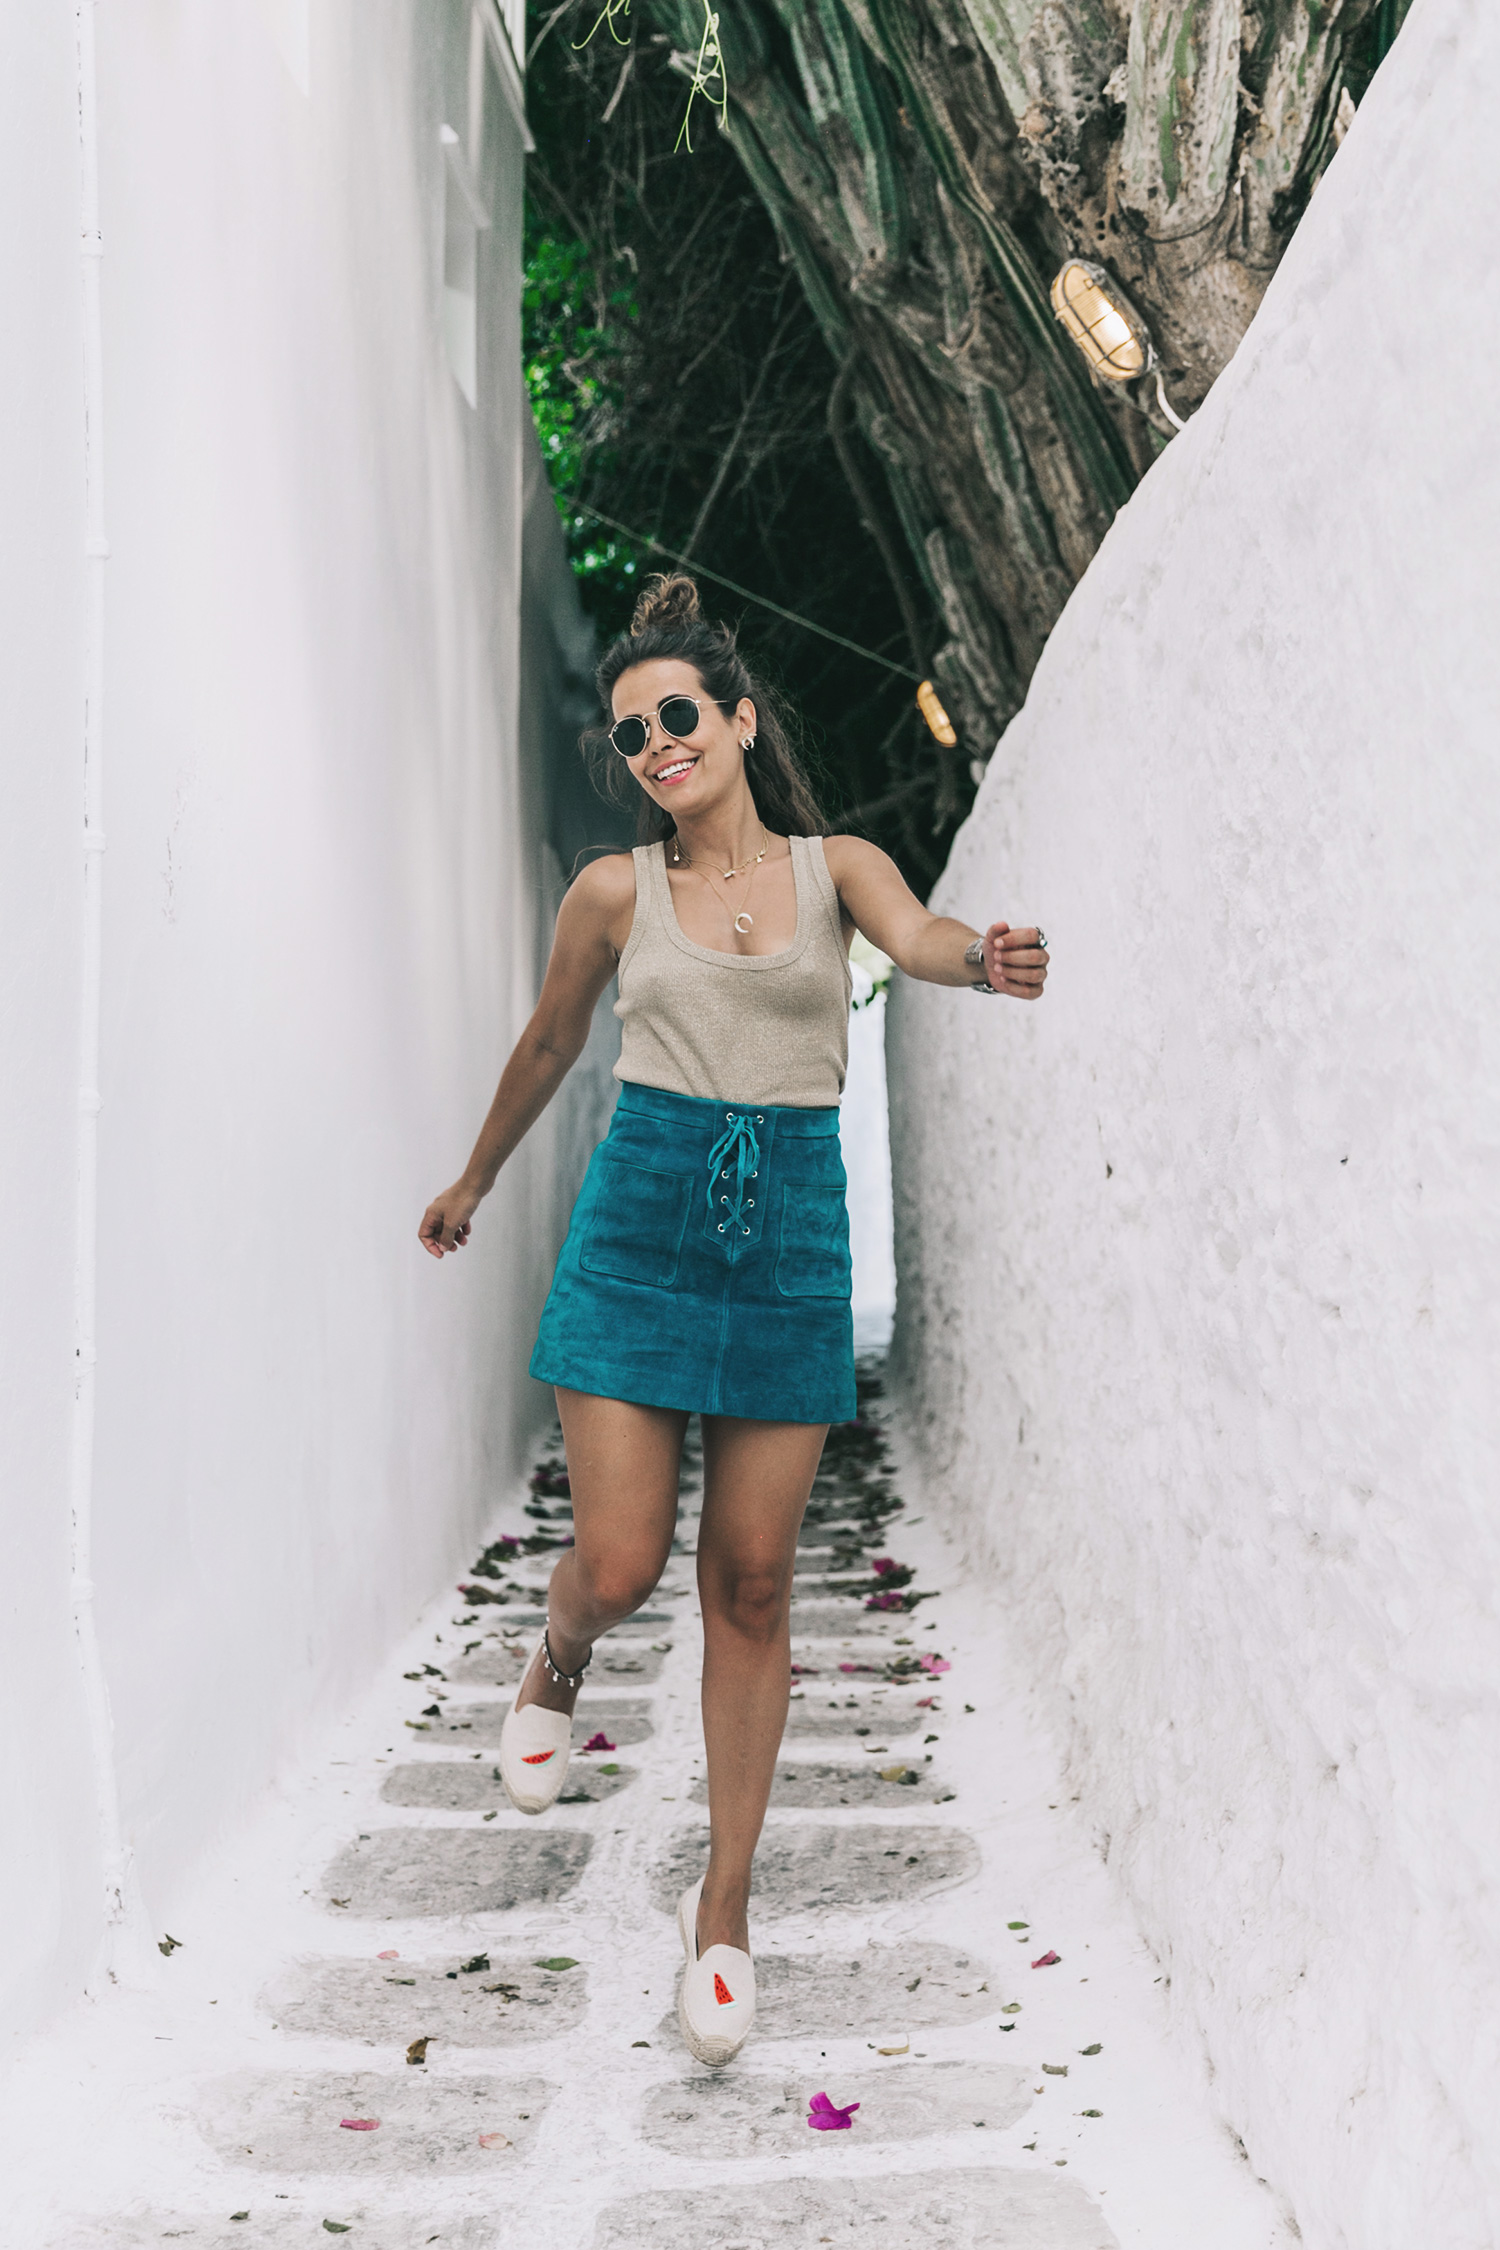 Gold_Top-Metallic_Trend-Suede_Skirt-Turquoise_Skirt-Soludos_Espadrilles-Soludos_Escapes-Mykonos-Greece-Collage_Vintage-Street_Style-53